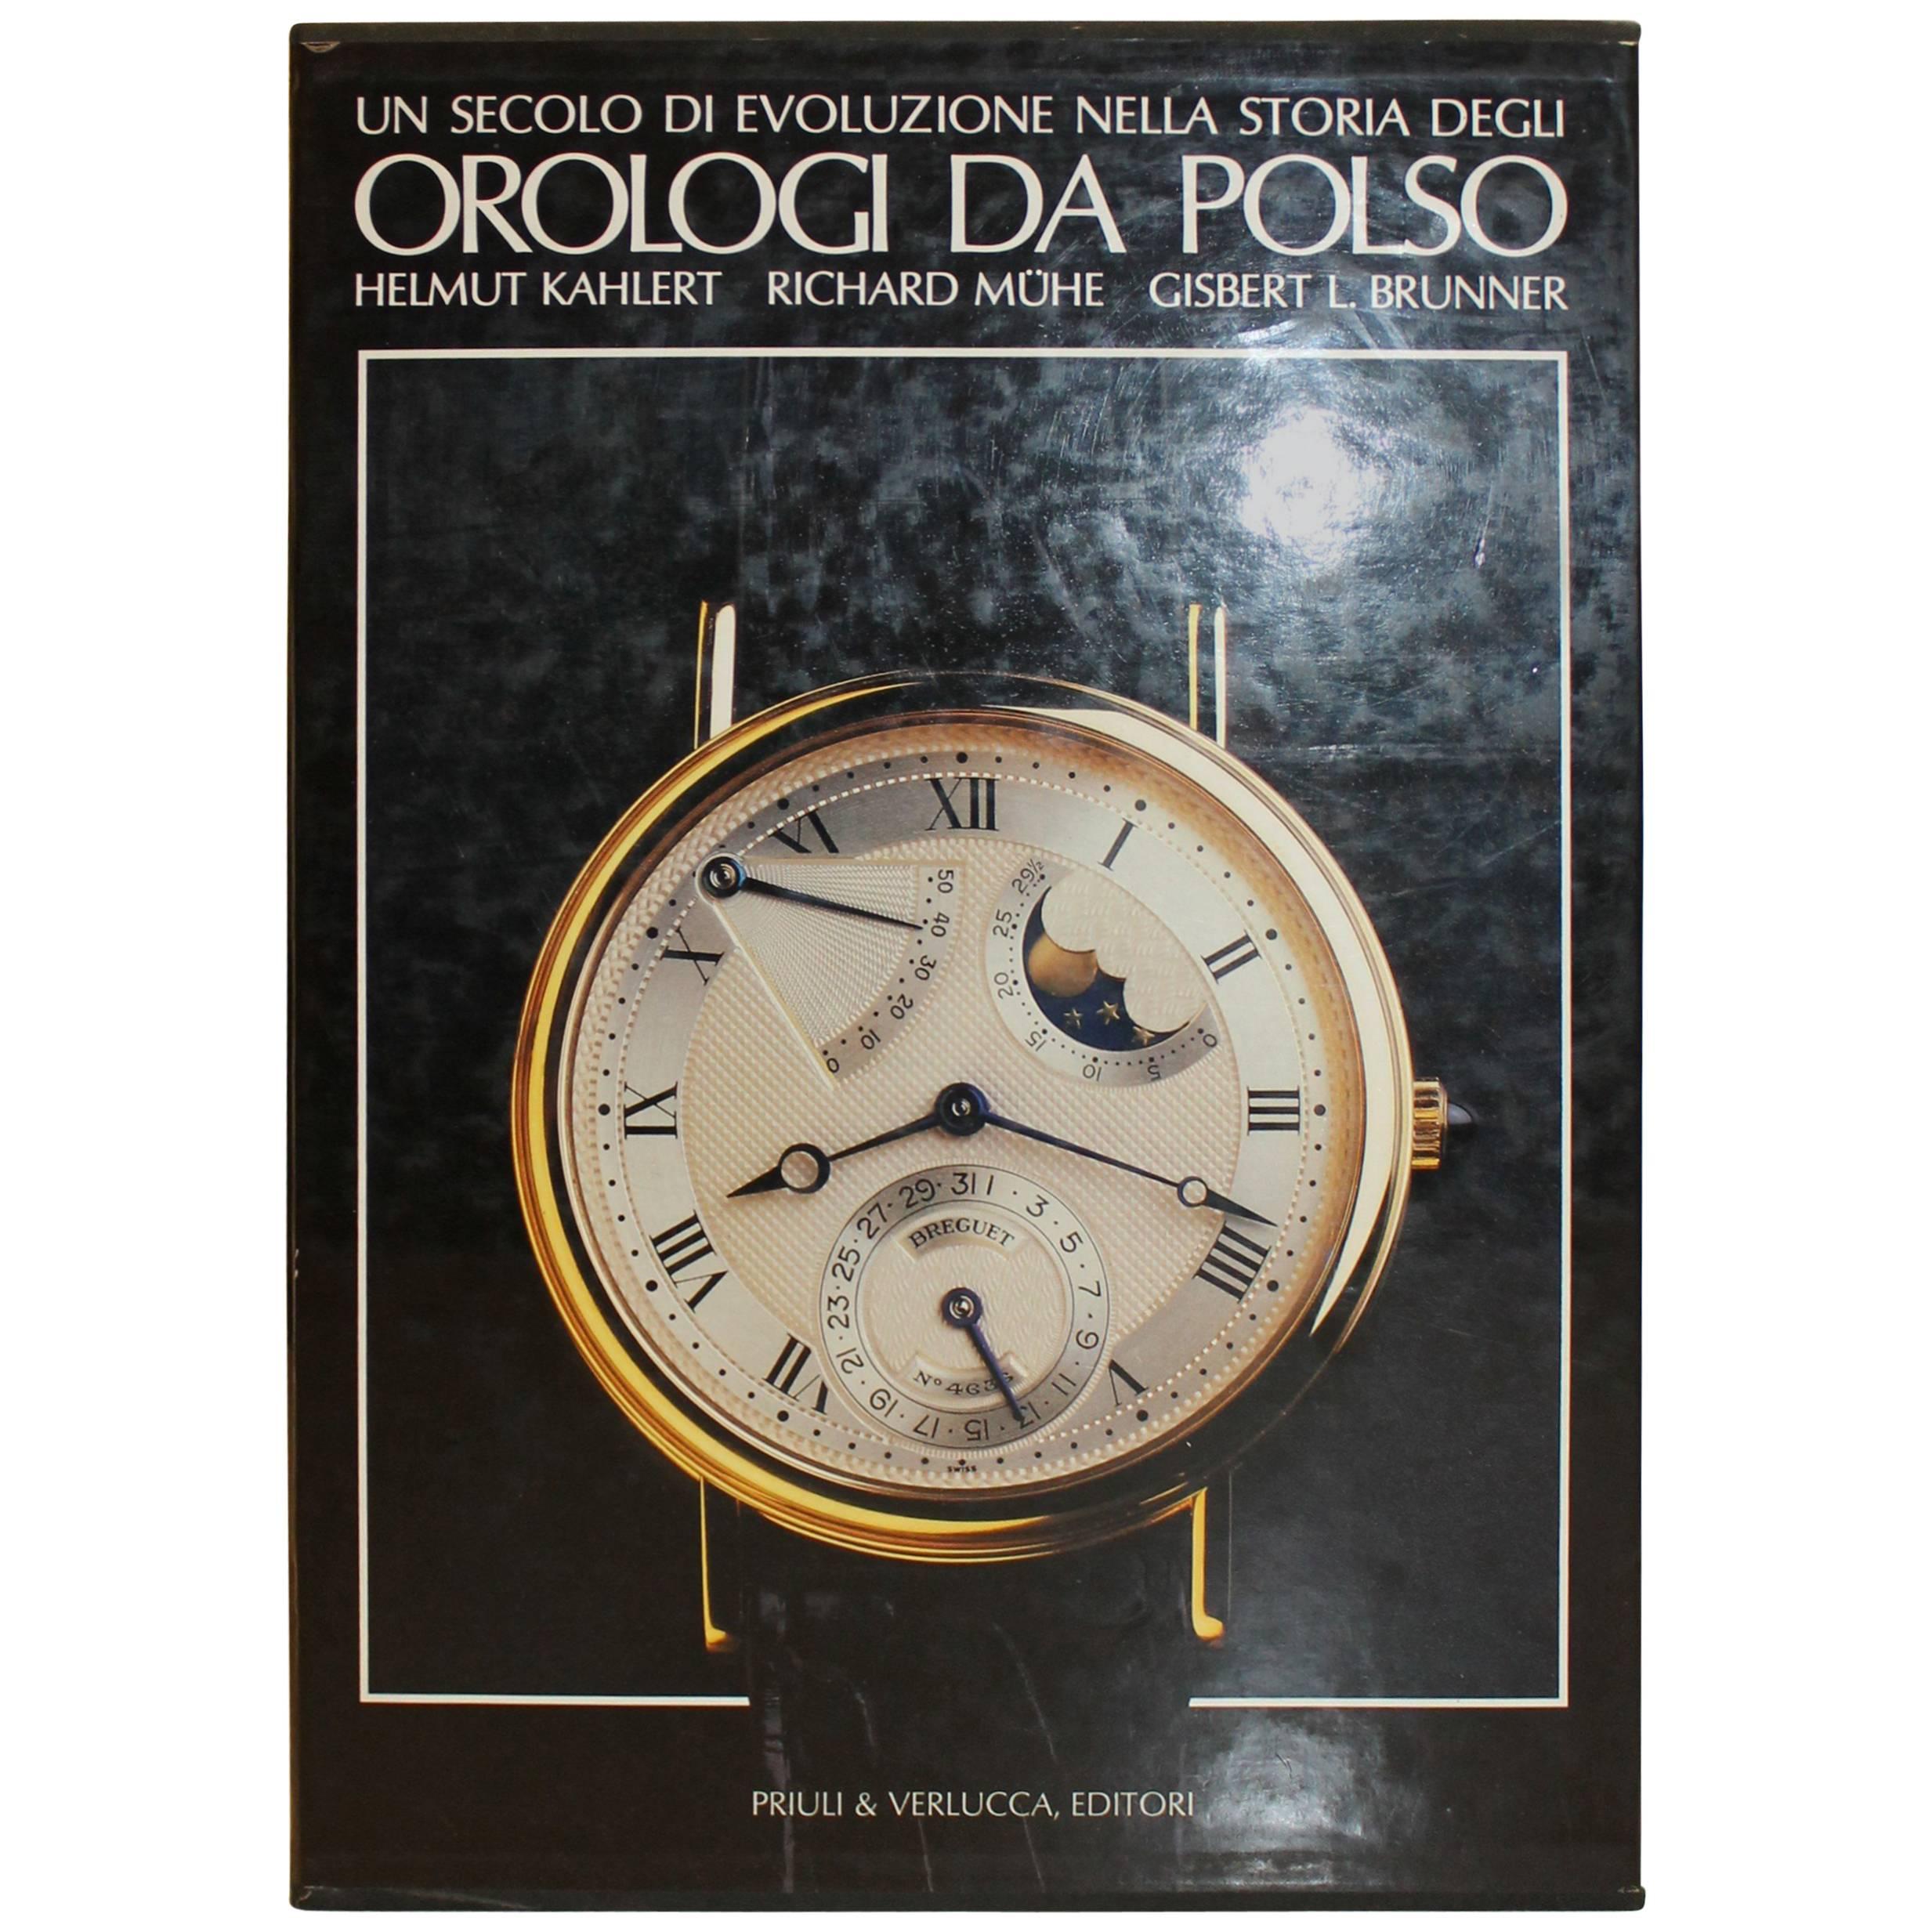 Orologi Da Polso Book, 771 Illustrations, 401 Pages, 1988 For Sale